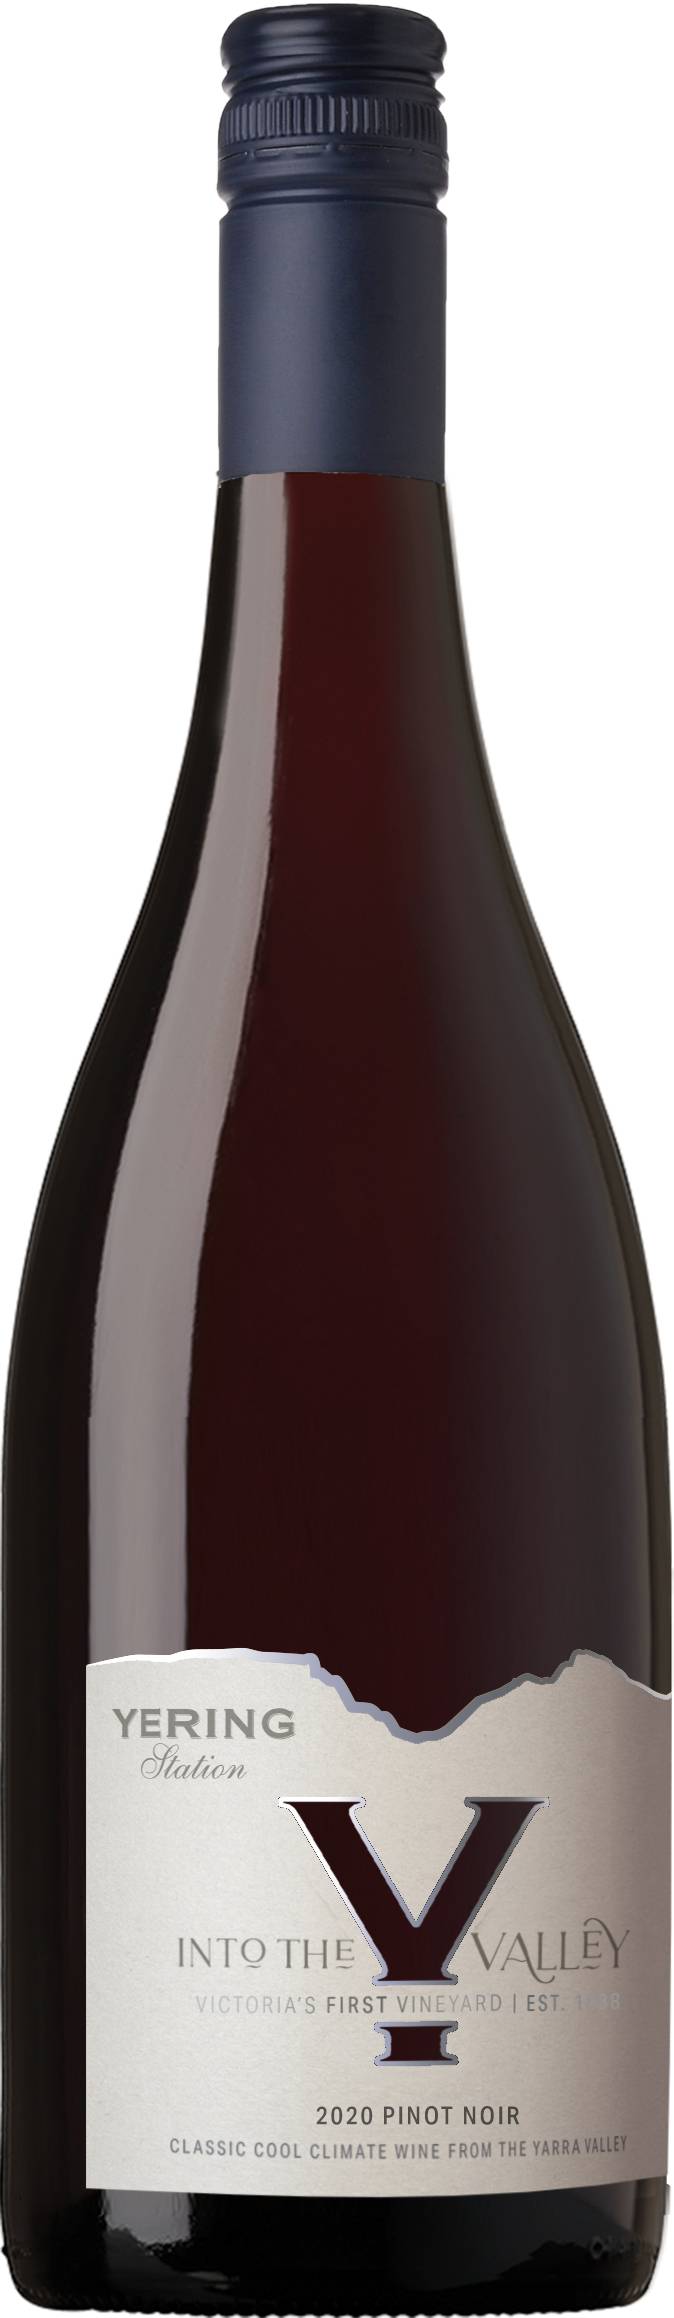 Yering Station Into The Valley Pinot Noir 750ml